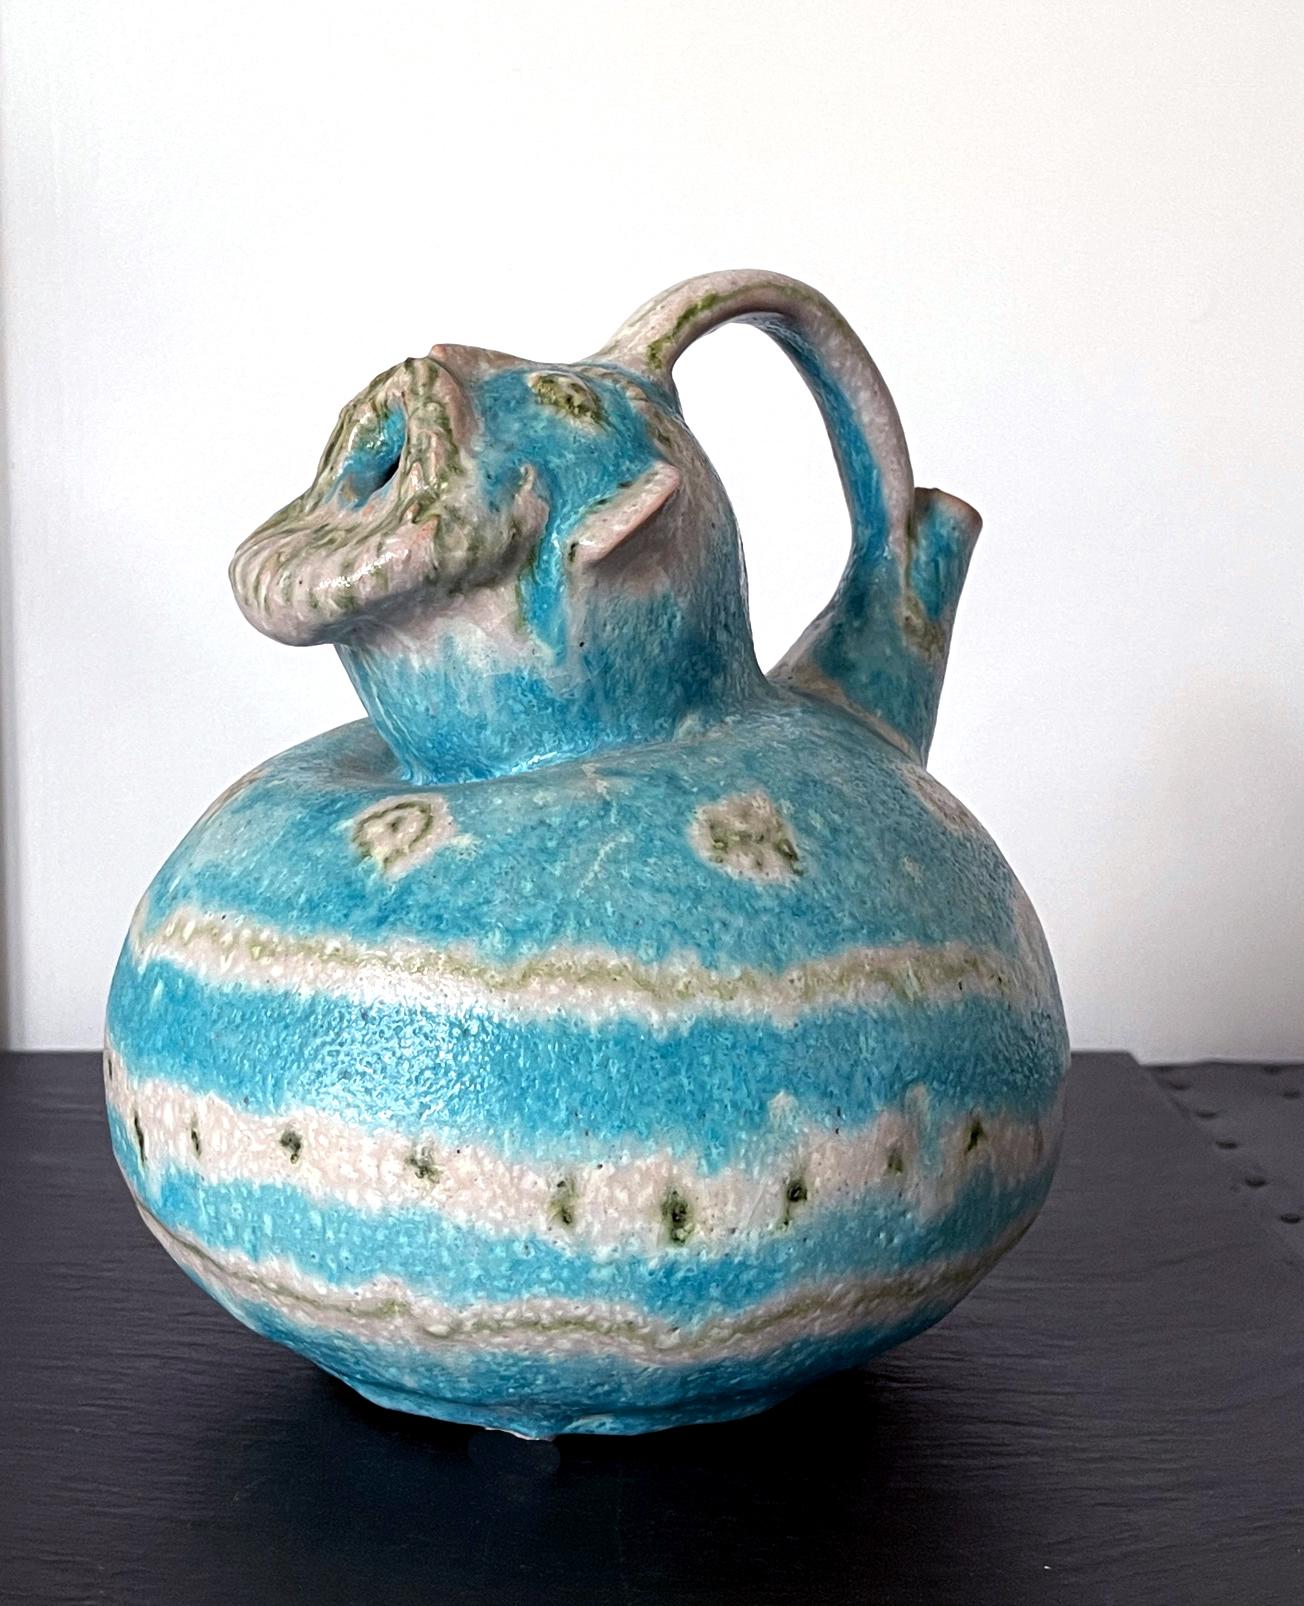 A stoneware pitcher with stirrup handle by Guido Gambon, Italy, circa 1950-60s. Beautifully glazed in blue and white color and lava-like texture and highlighted with signature green geometric lines and circles and dots. What's unusual of this pot is